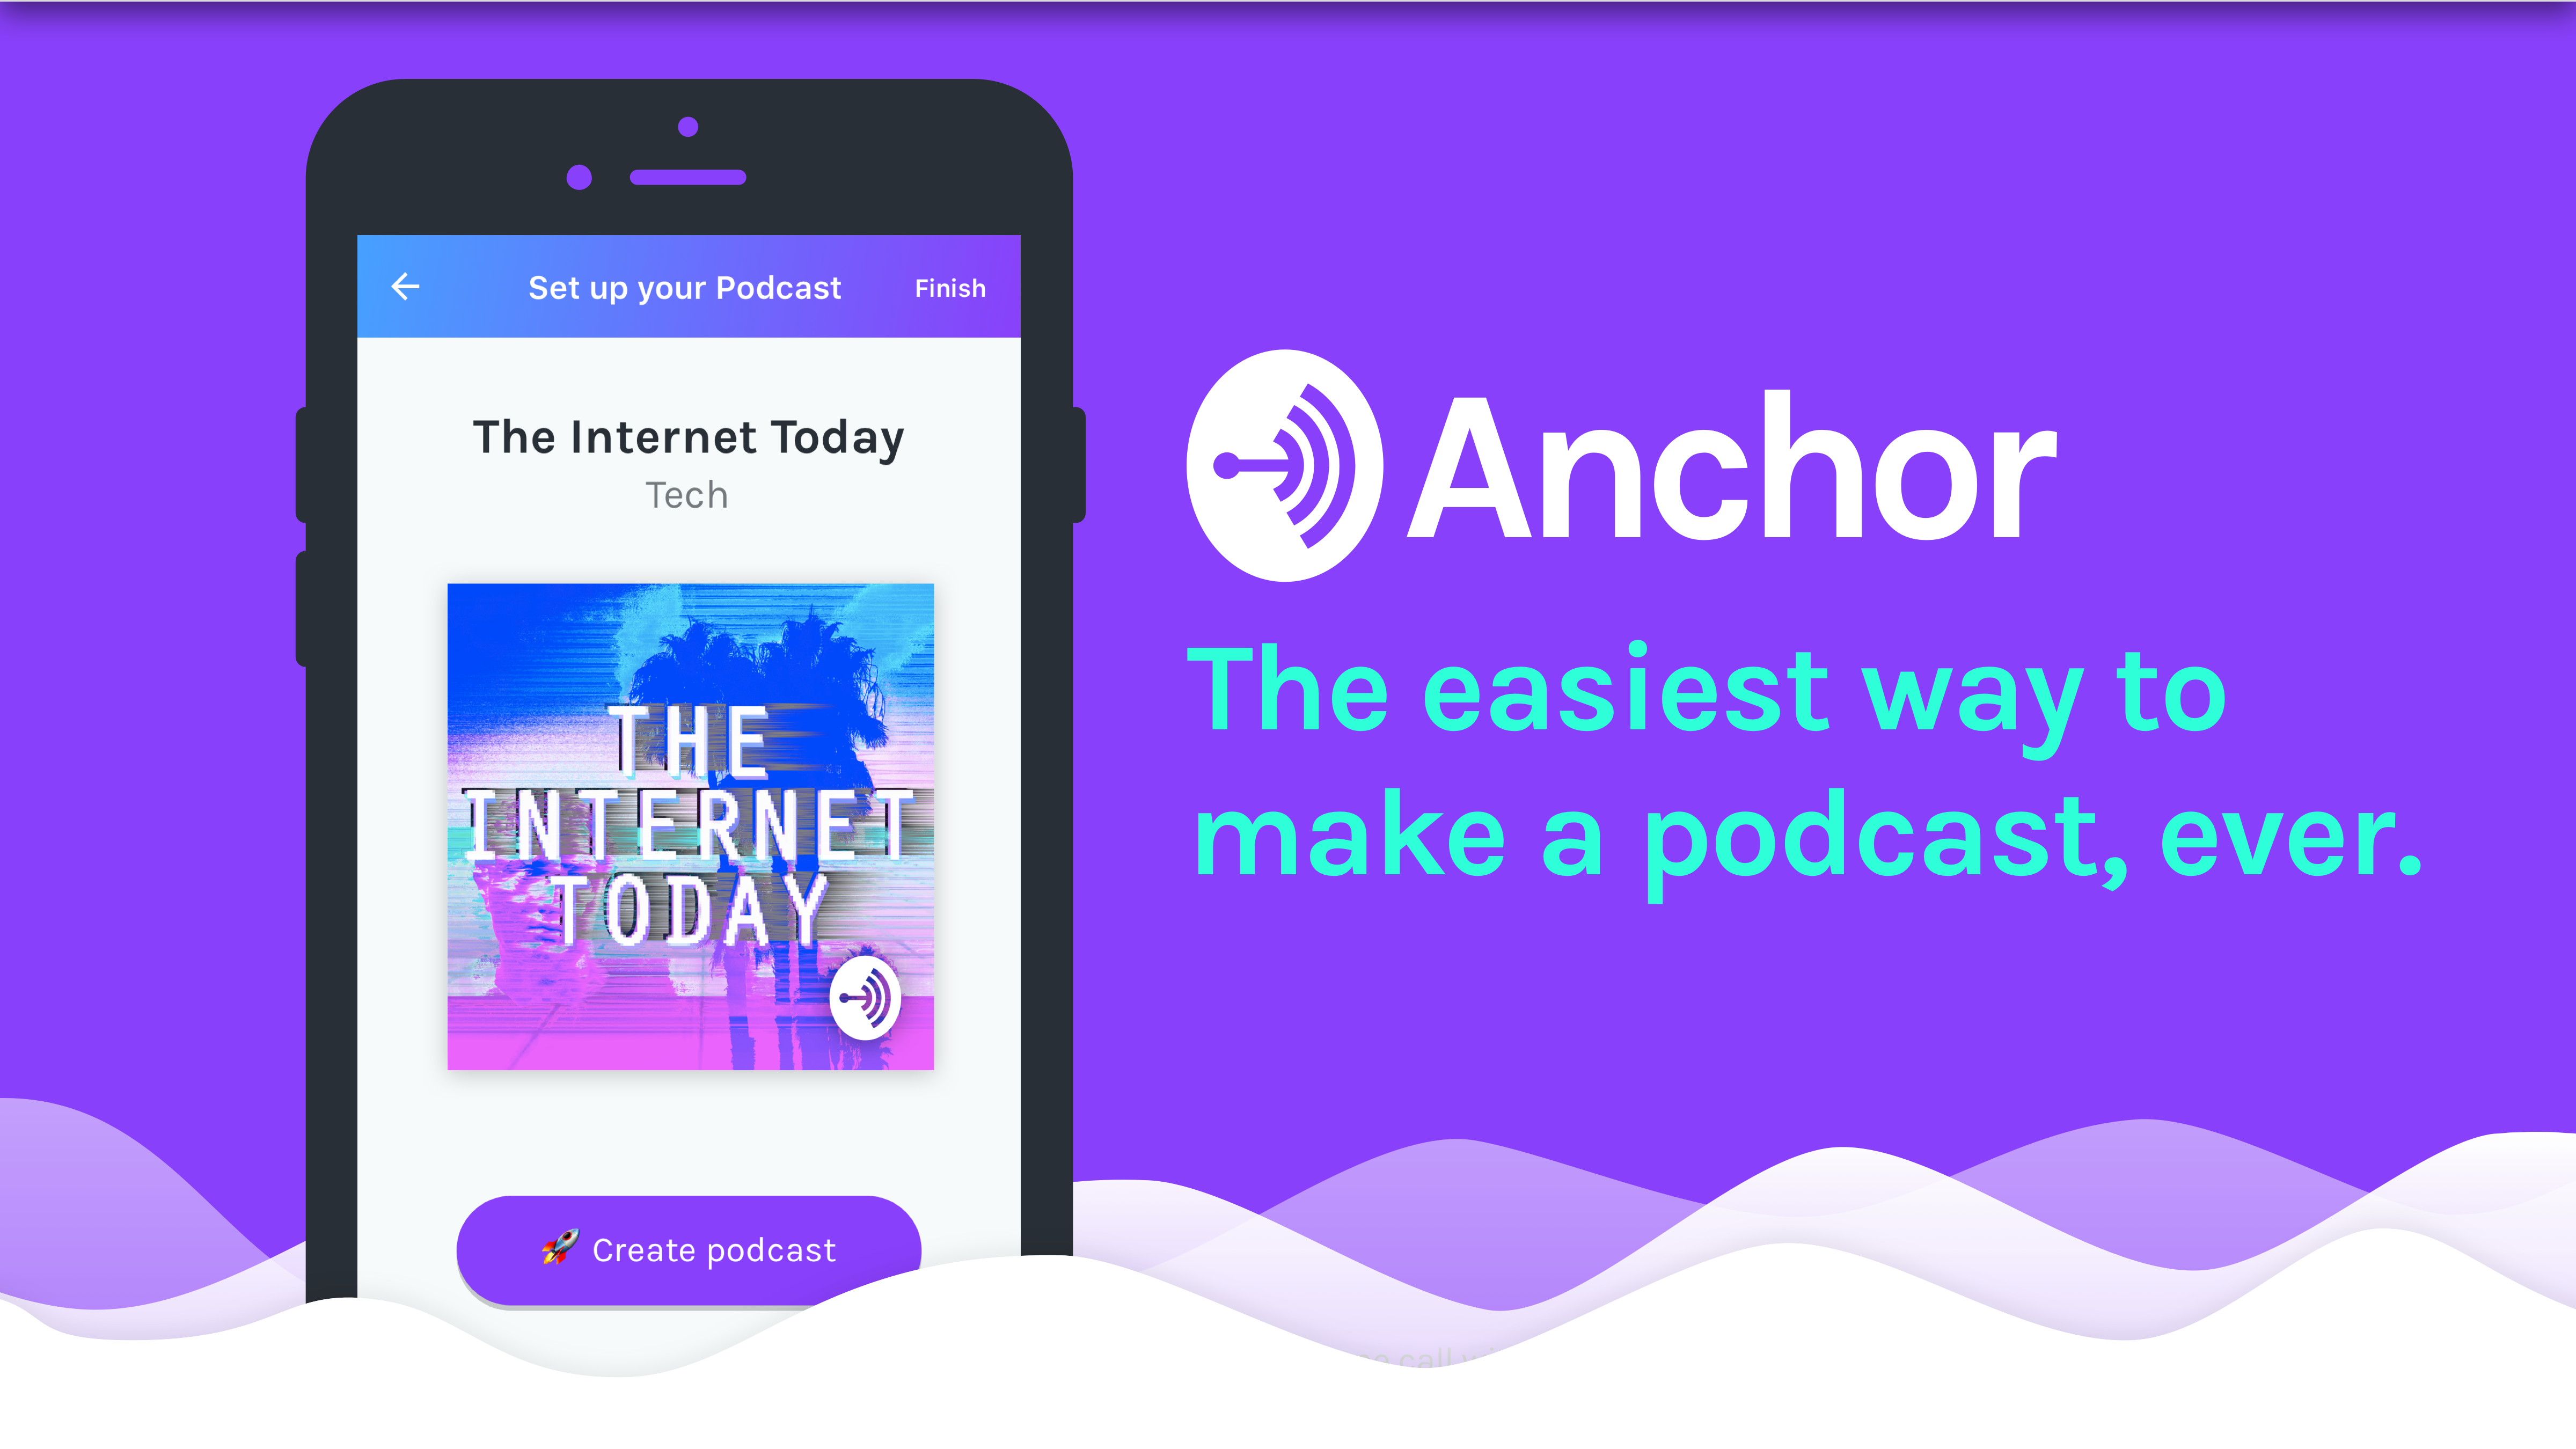 Anchor is now the easiest way to make a podcast, ever., by Anchor, Anchor